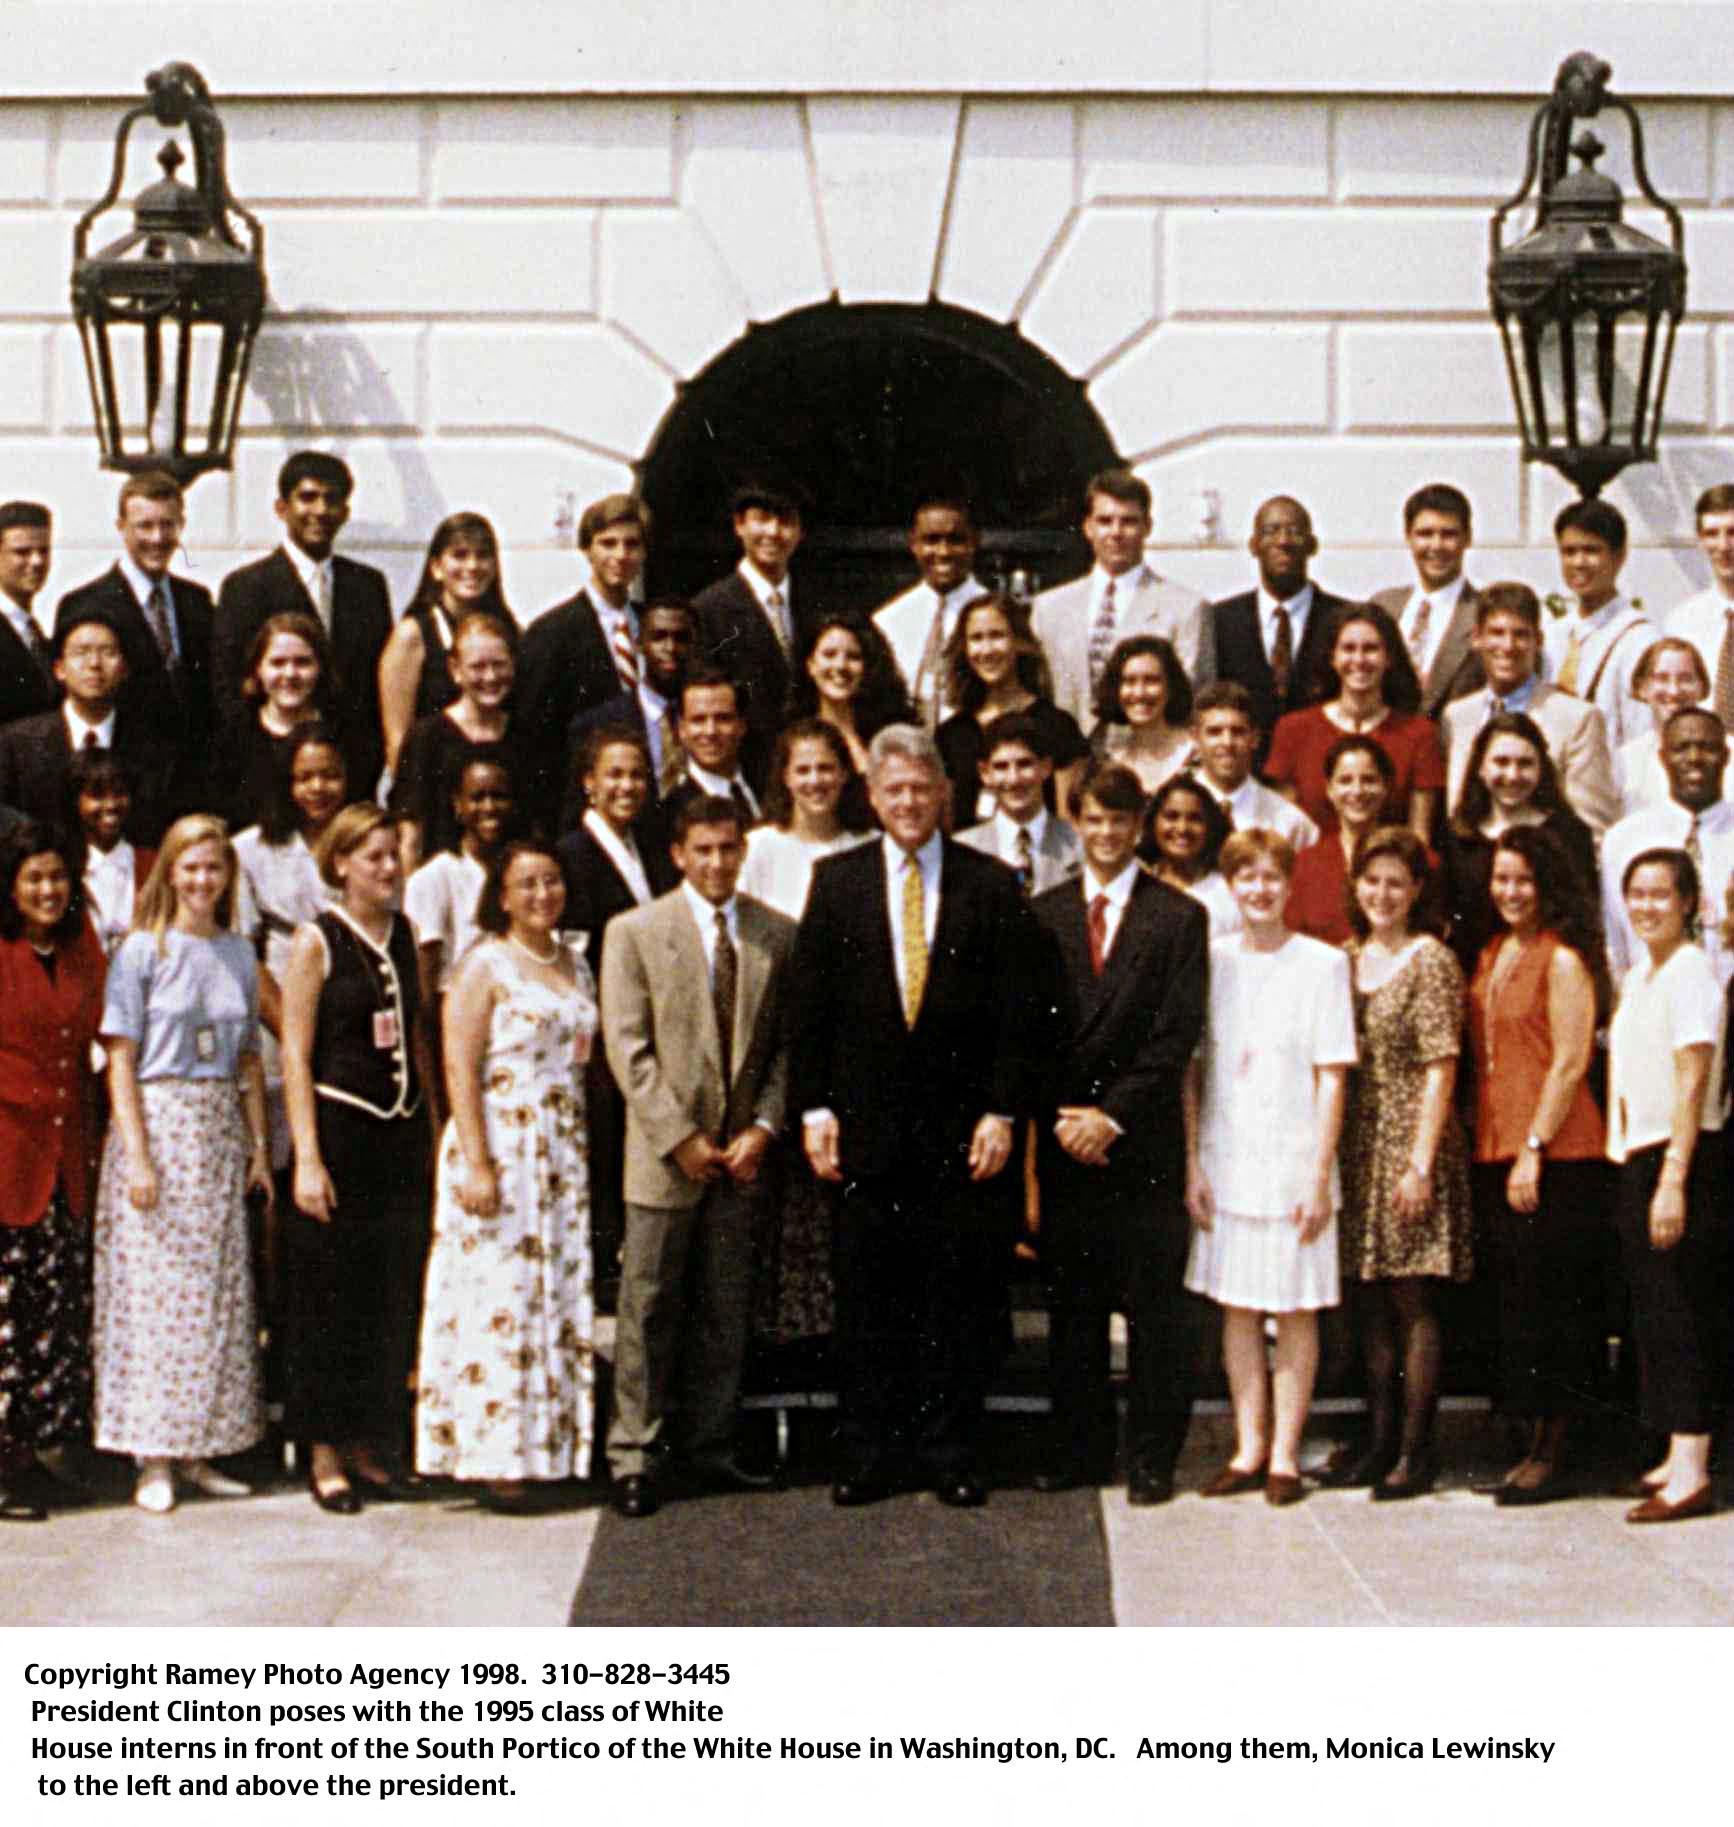 Bill Clinton poses with the 1995 White House interns.